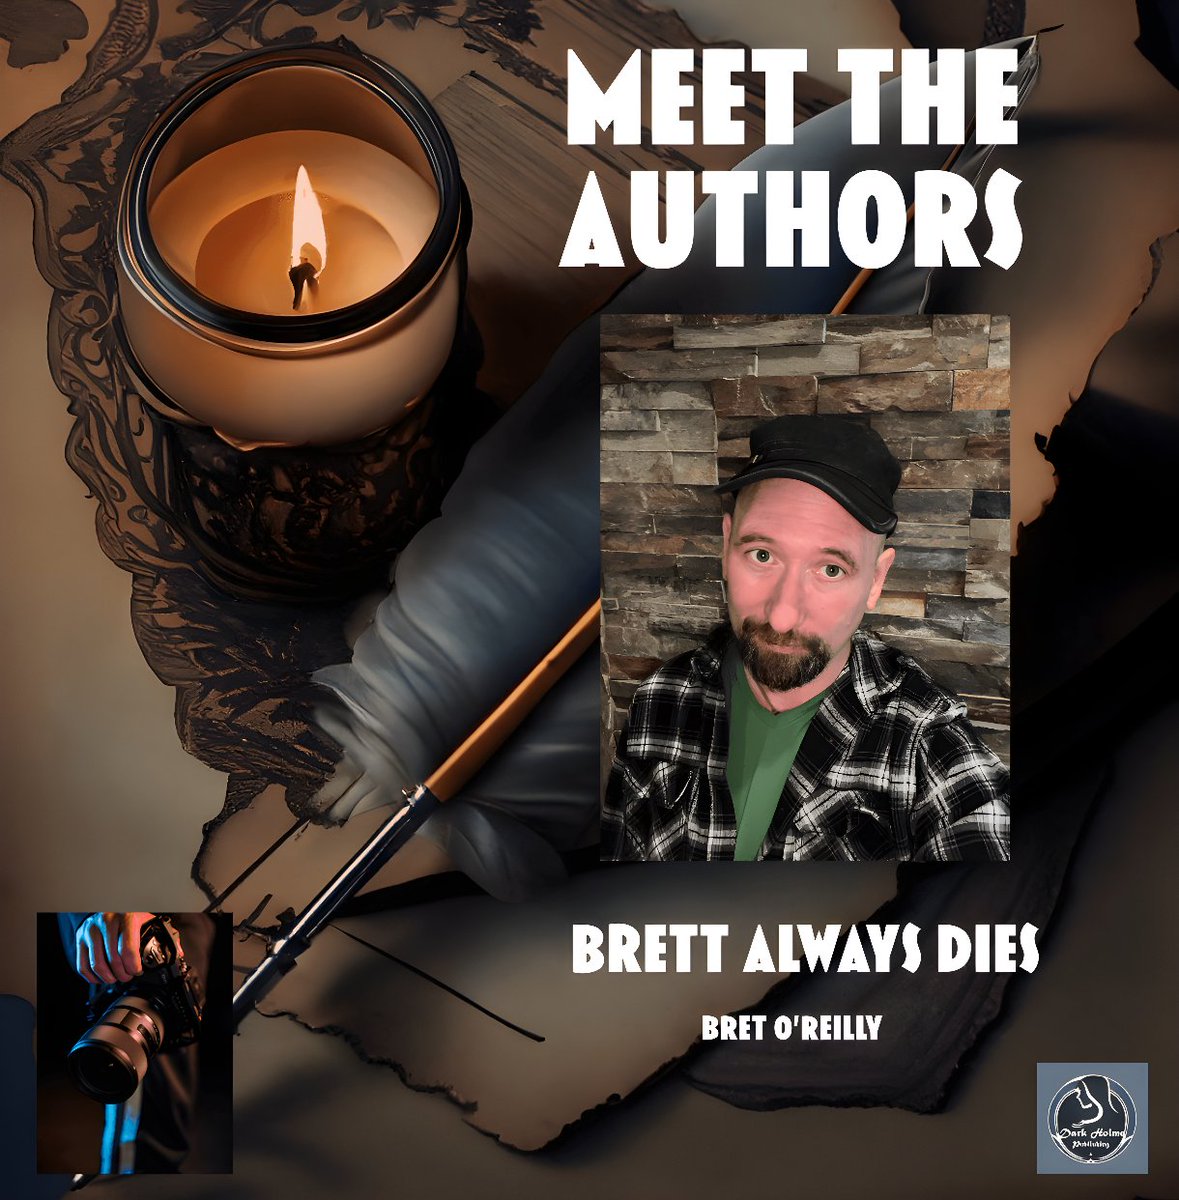 A jack-of-all-trades turned author from Surrey, BC. When not dodging golf balls or buried in horror movies, he's crafting captivating tales. With his family and the illustrious Joey Bojangles by his side, Brett's dedication to writing shines through. 📚 #horrorcommunity